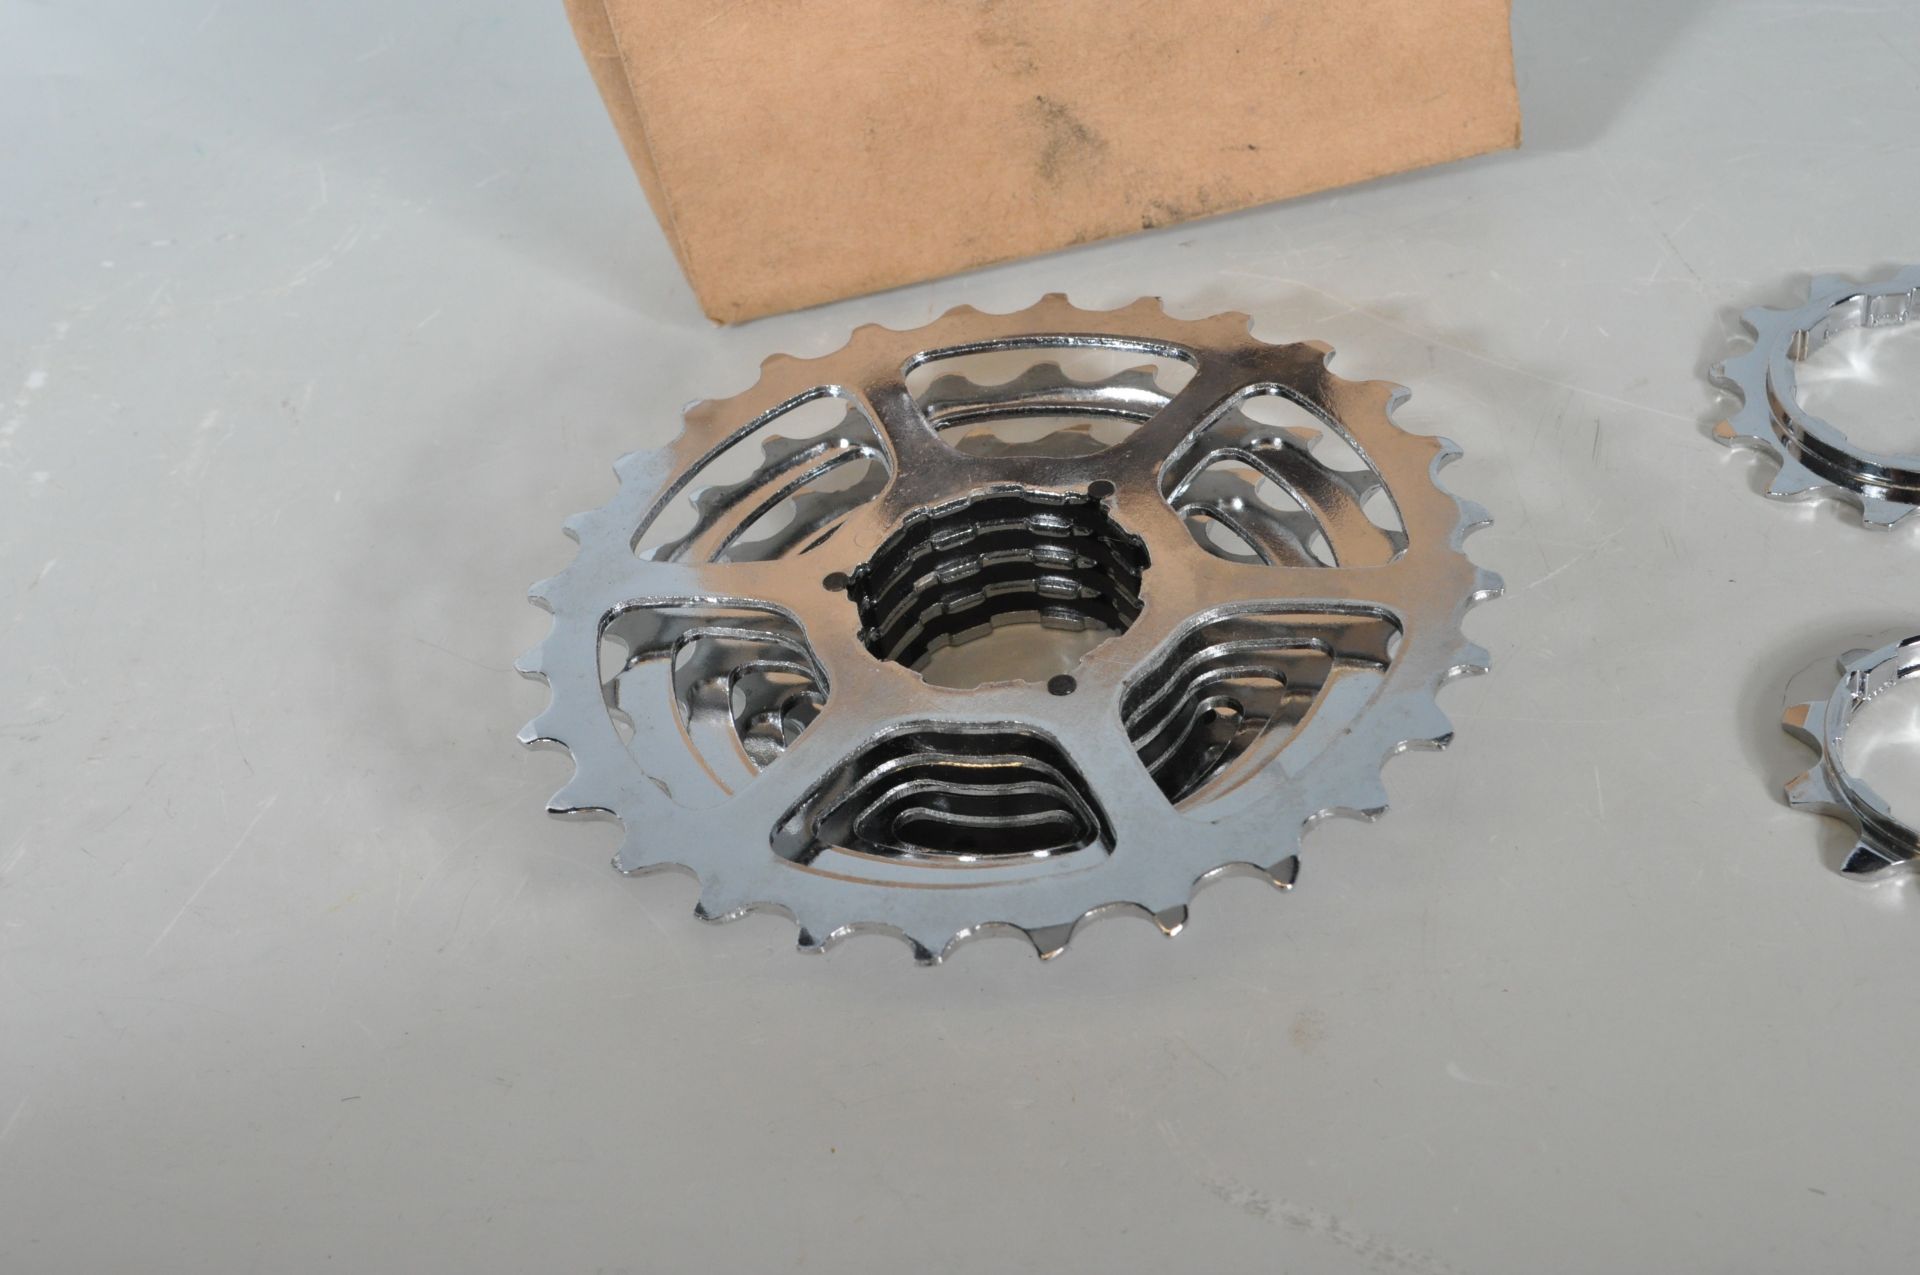 VINTAGE BICYCLES AND SPARES - SET OF NOS RACING BIKE GEARS - Image 8 of 9